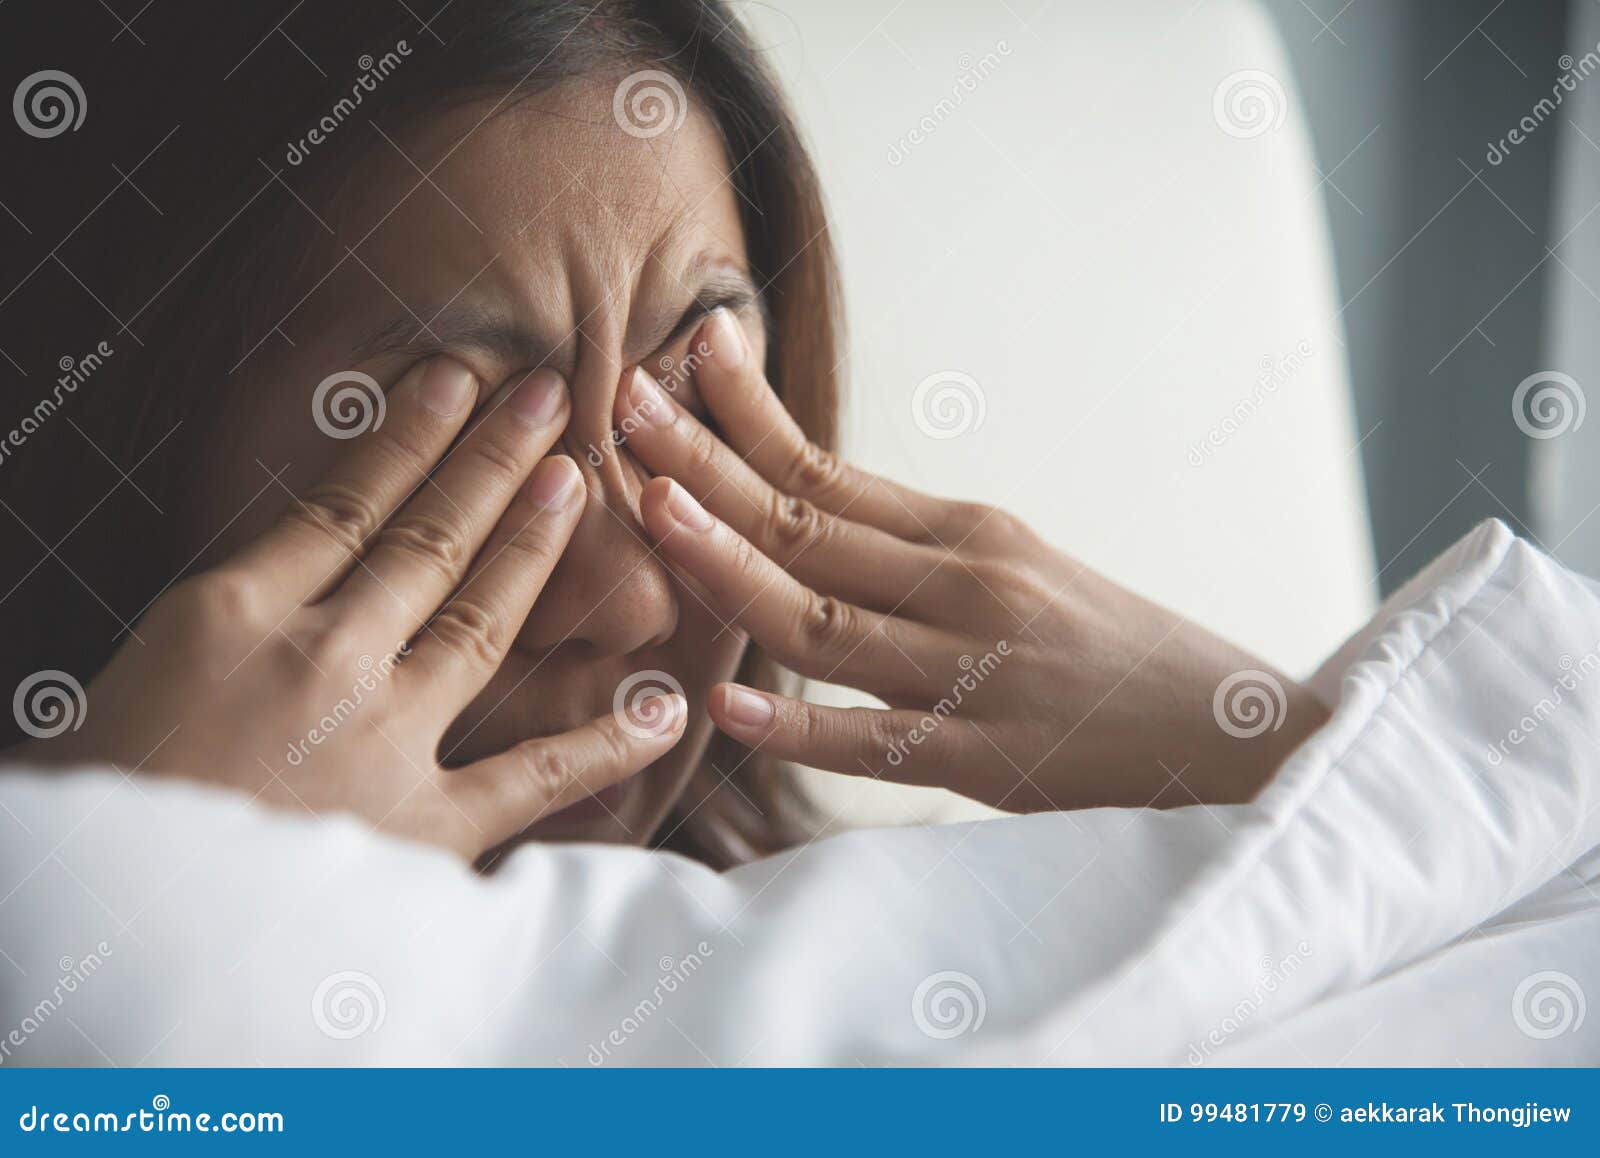 asian woman rubbing eyes with her hands on her bed.